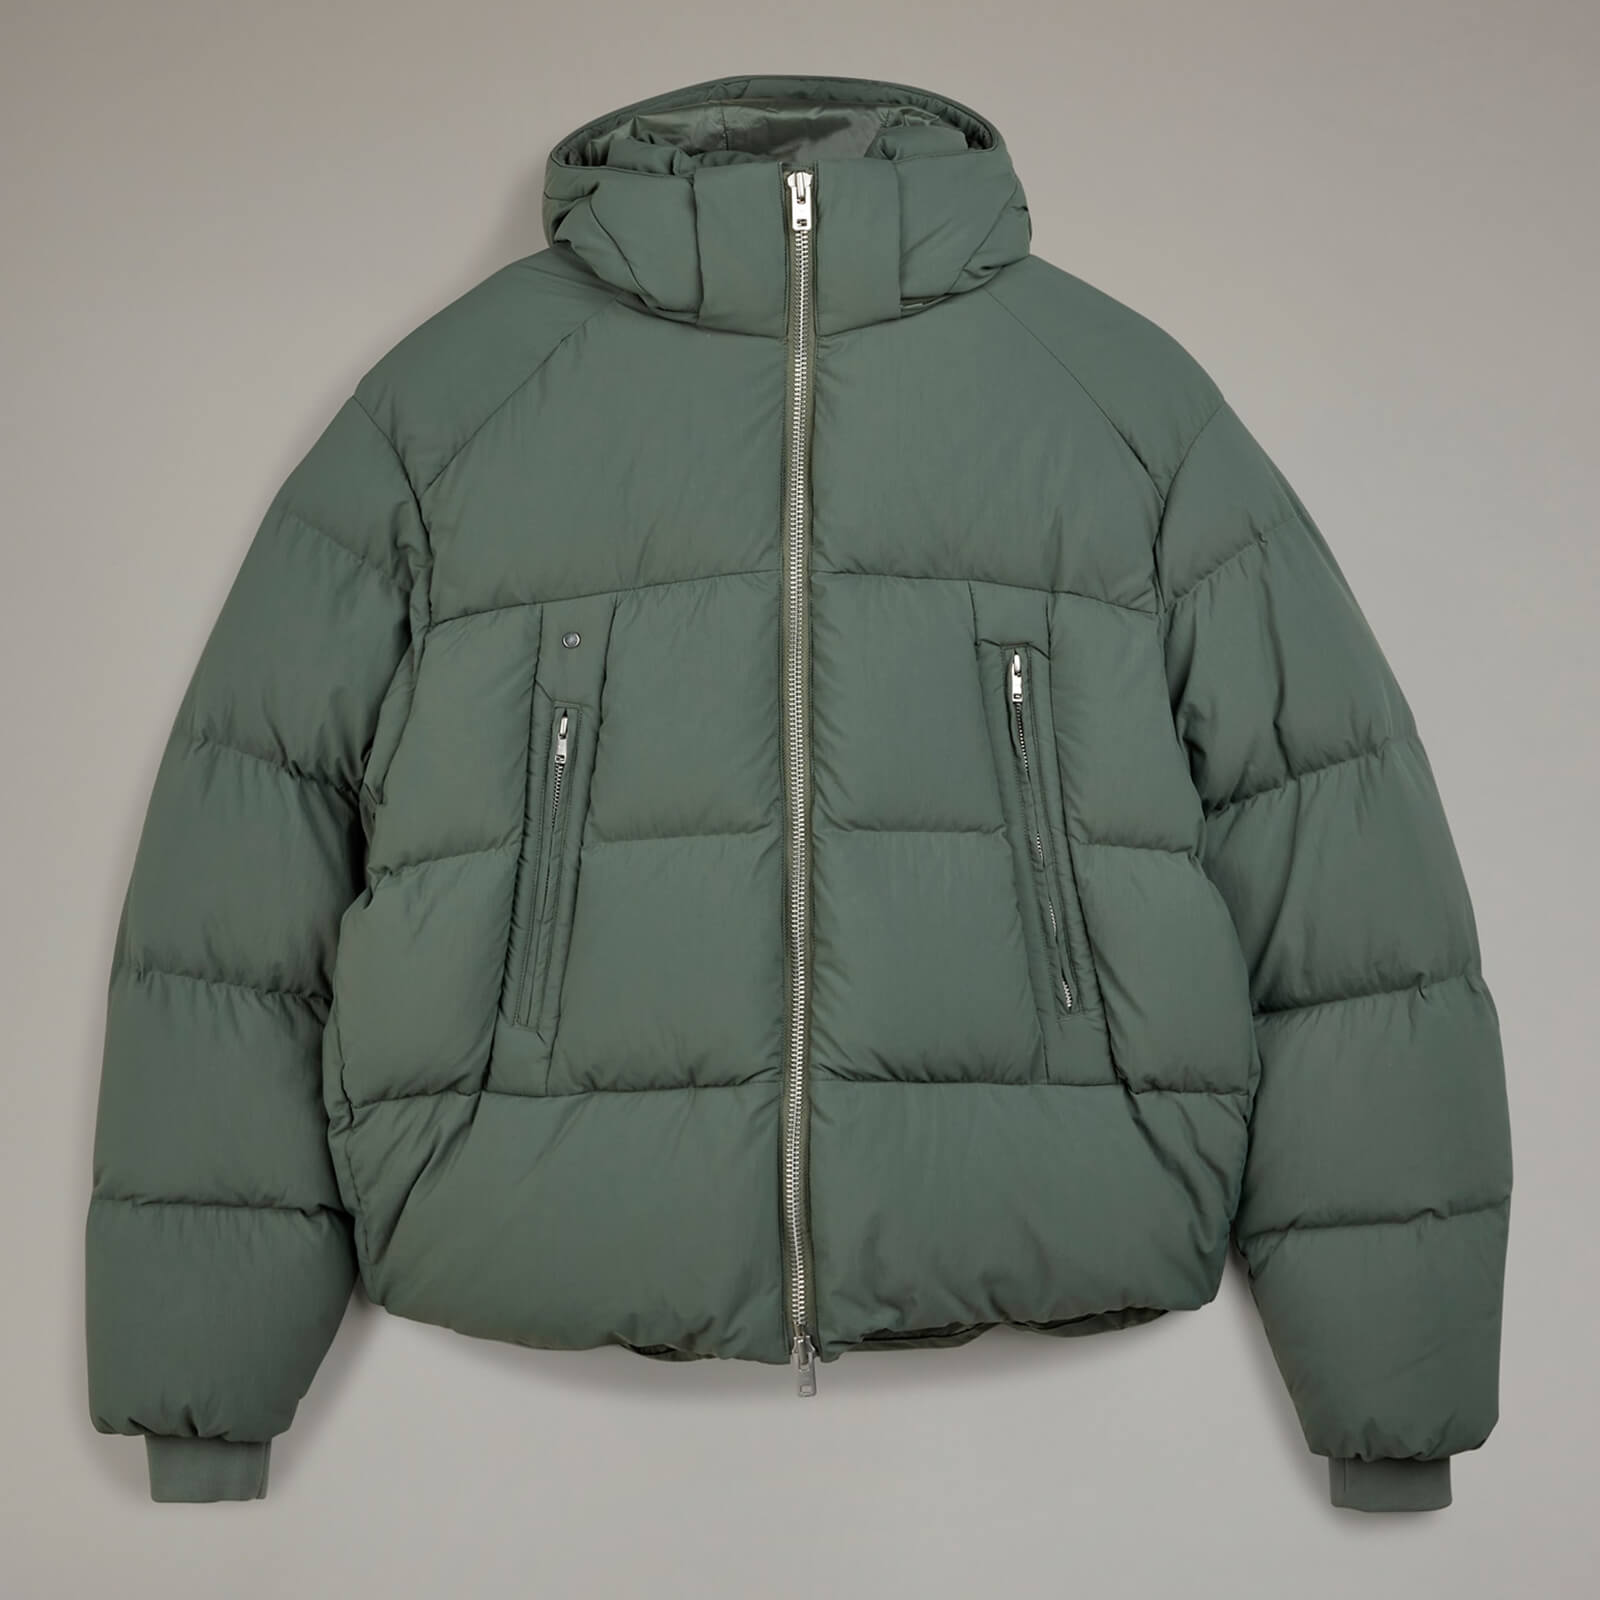 y-3 men's puff jacket - stone green - s